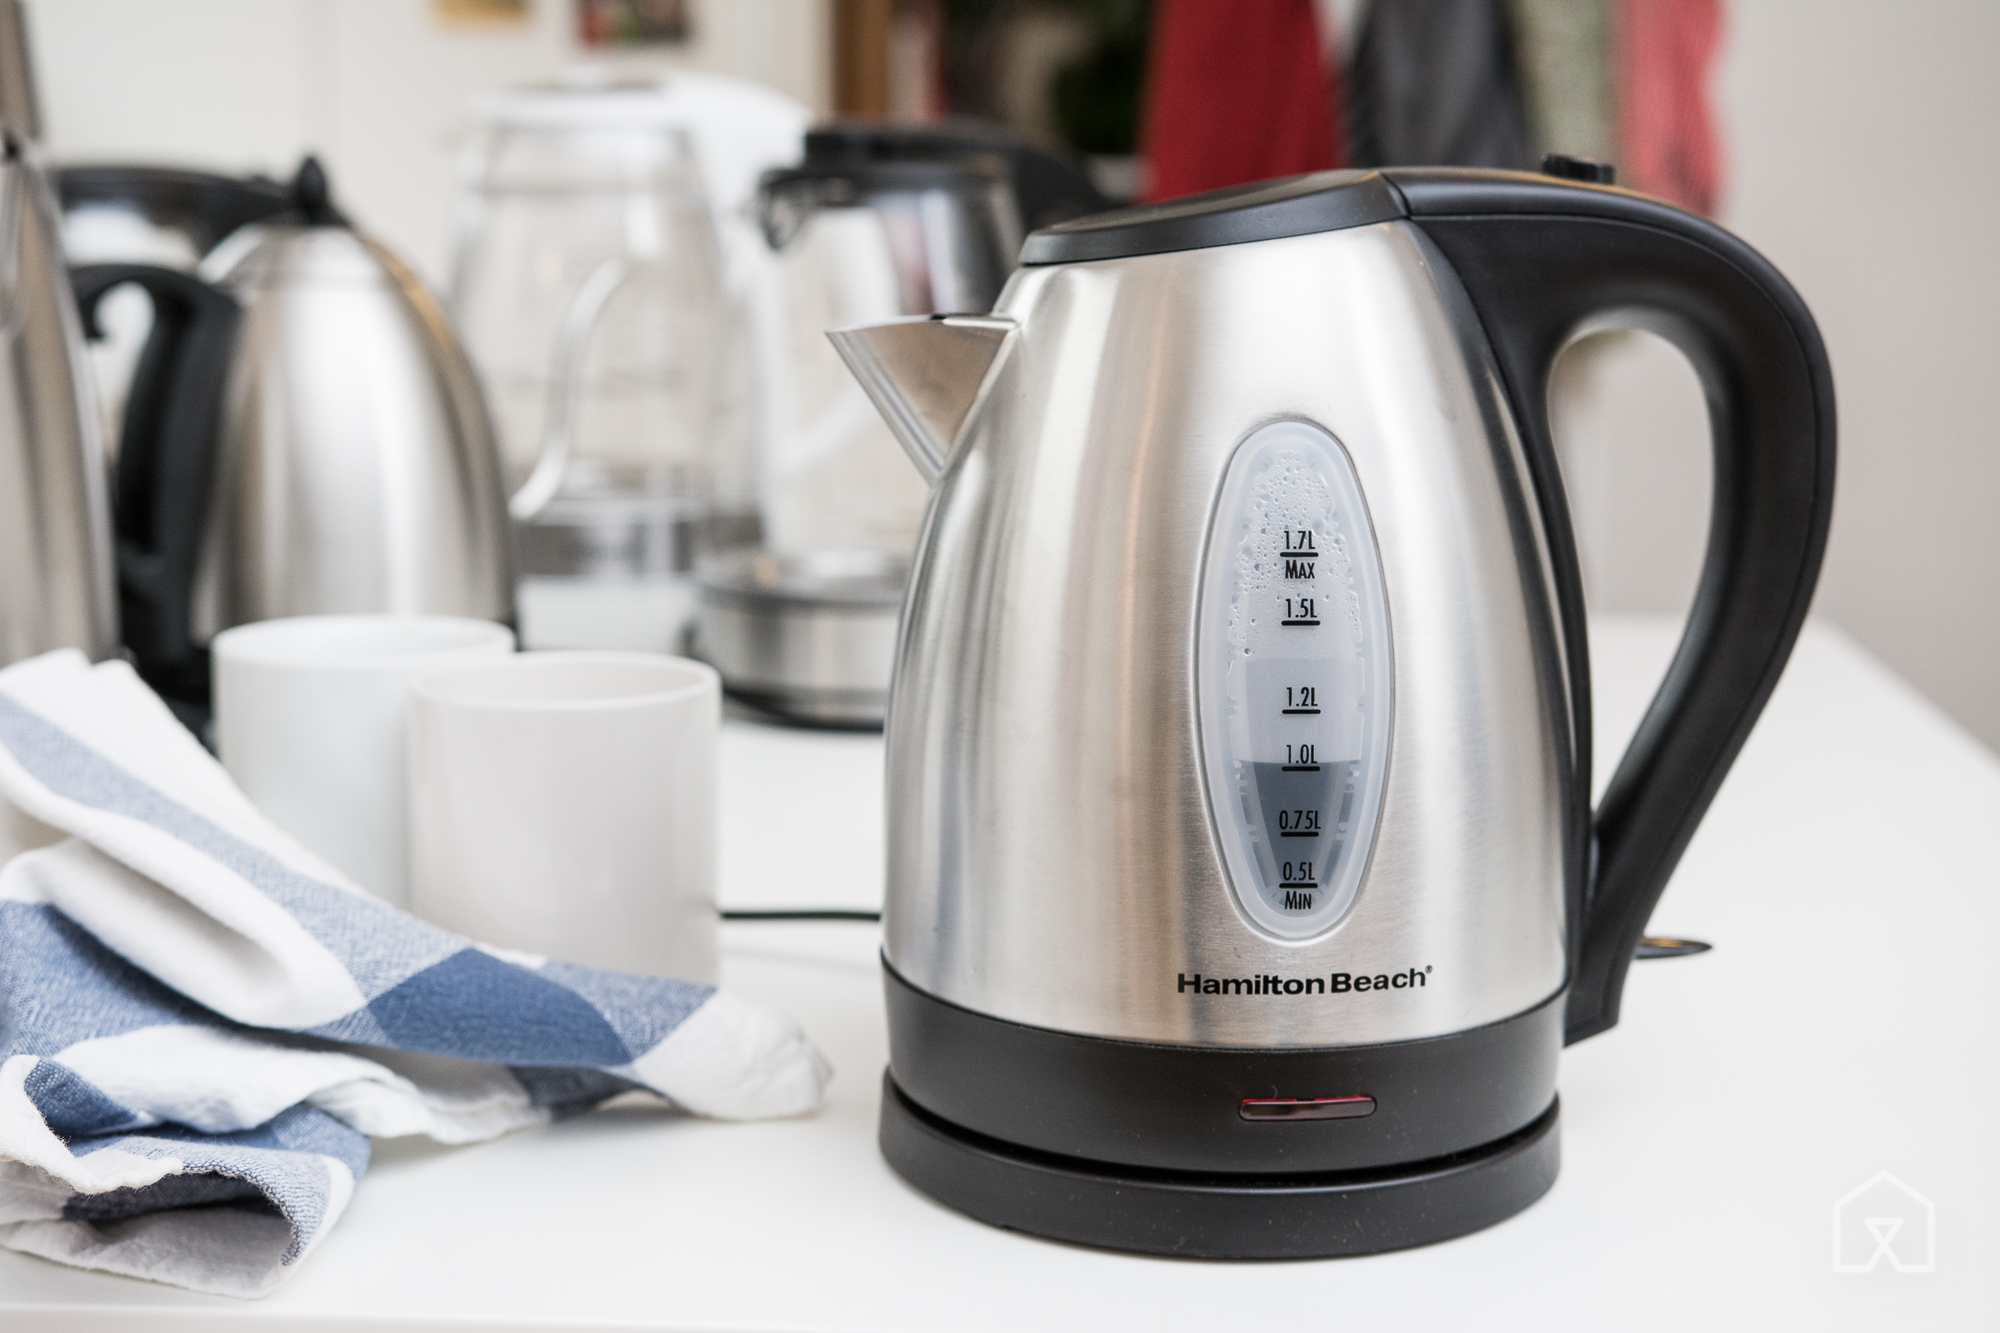 The best electric kettle | DeviceDaily.com